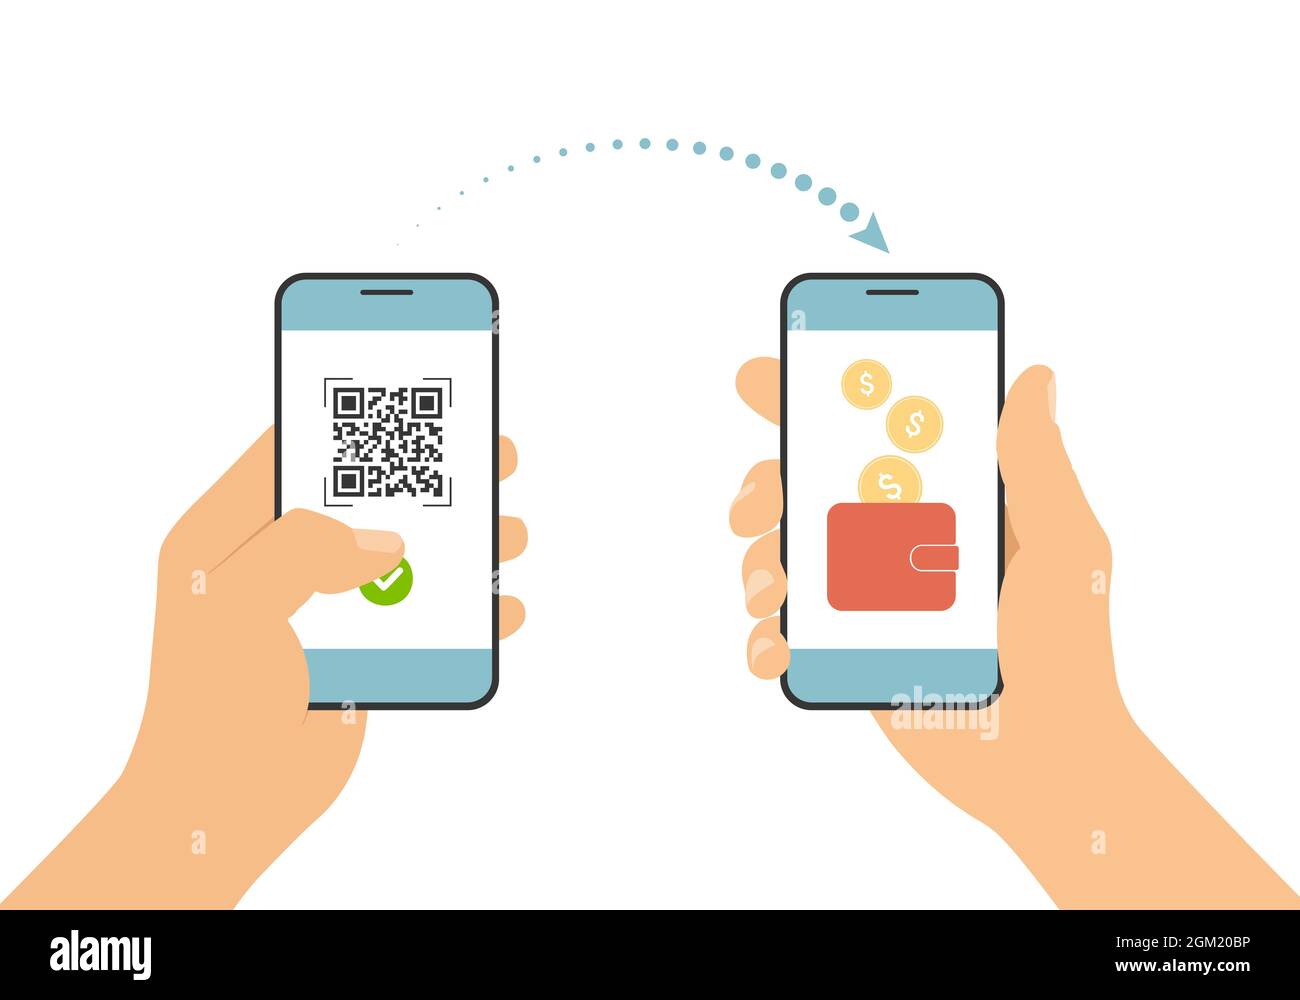 Flat design illustration of hand holding mobile phone. Scan QR code and pay online payment by smartphone to a bank account or wallet - vector Stock Vector